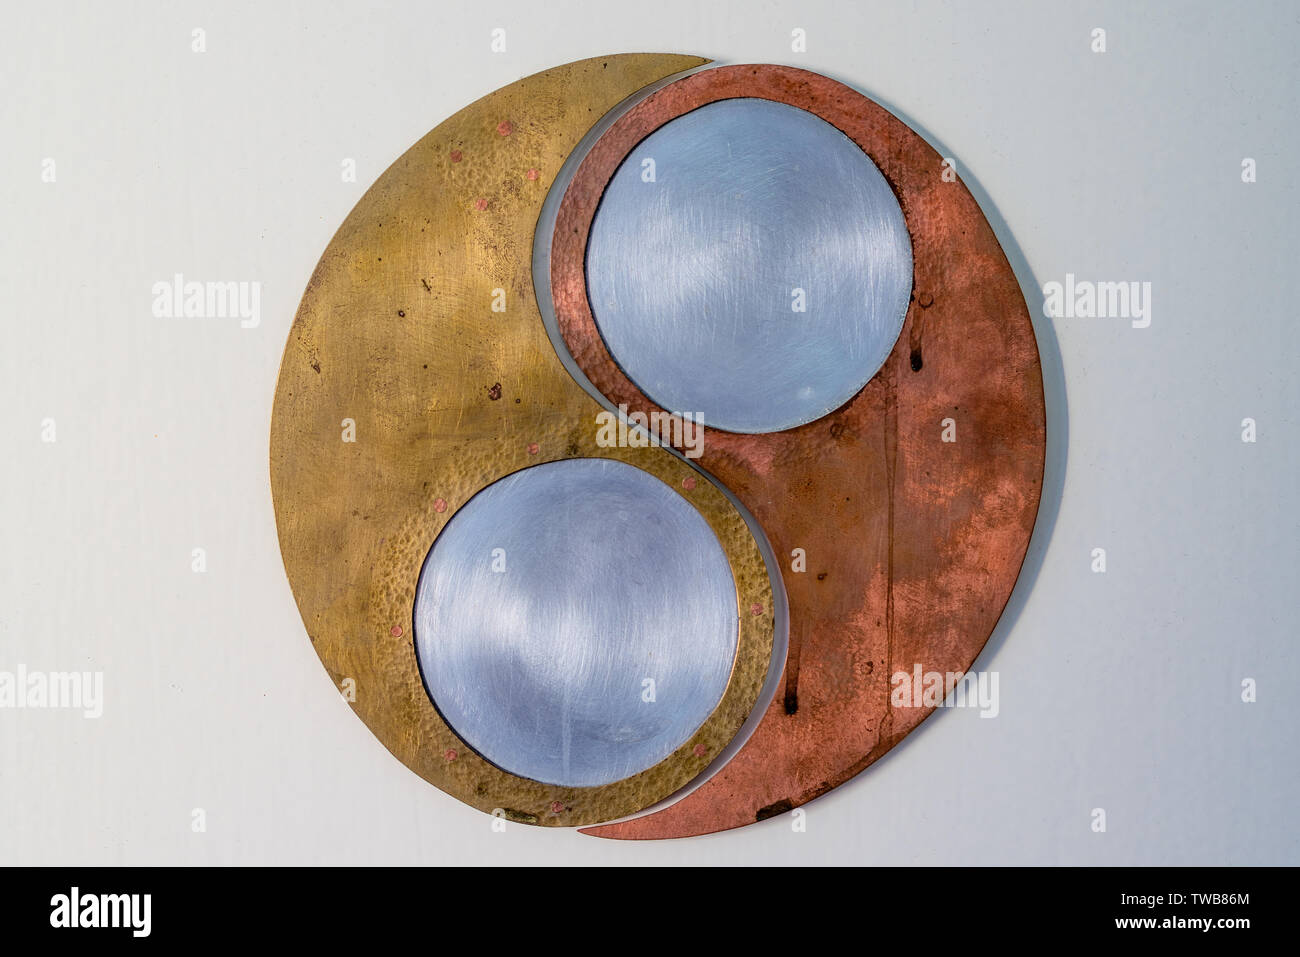 ying yang symbol hand made of copper, brass and steel Stock Photo